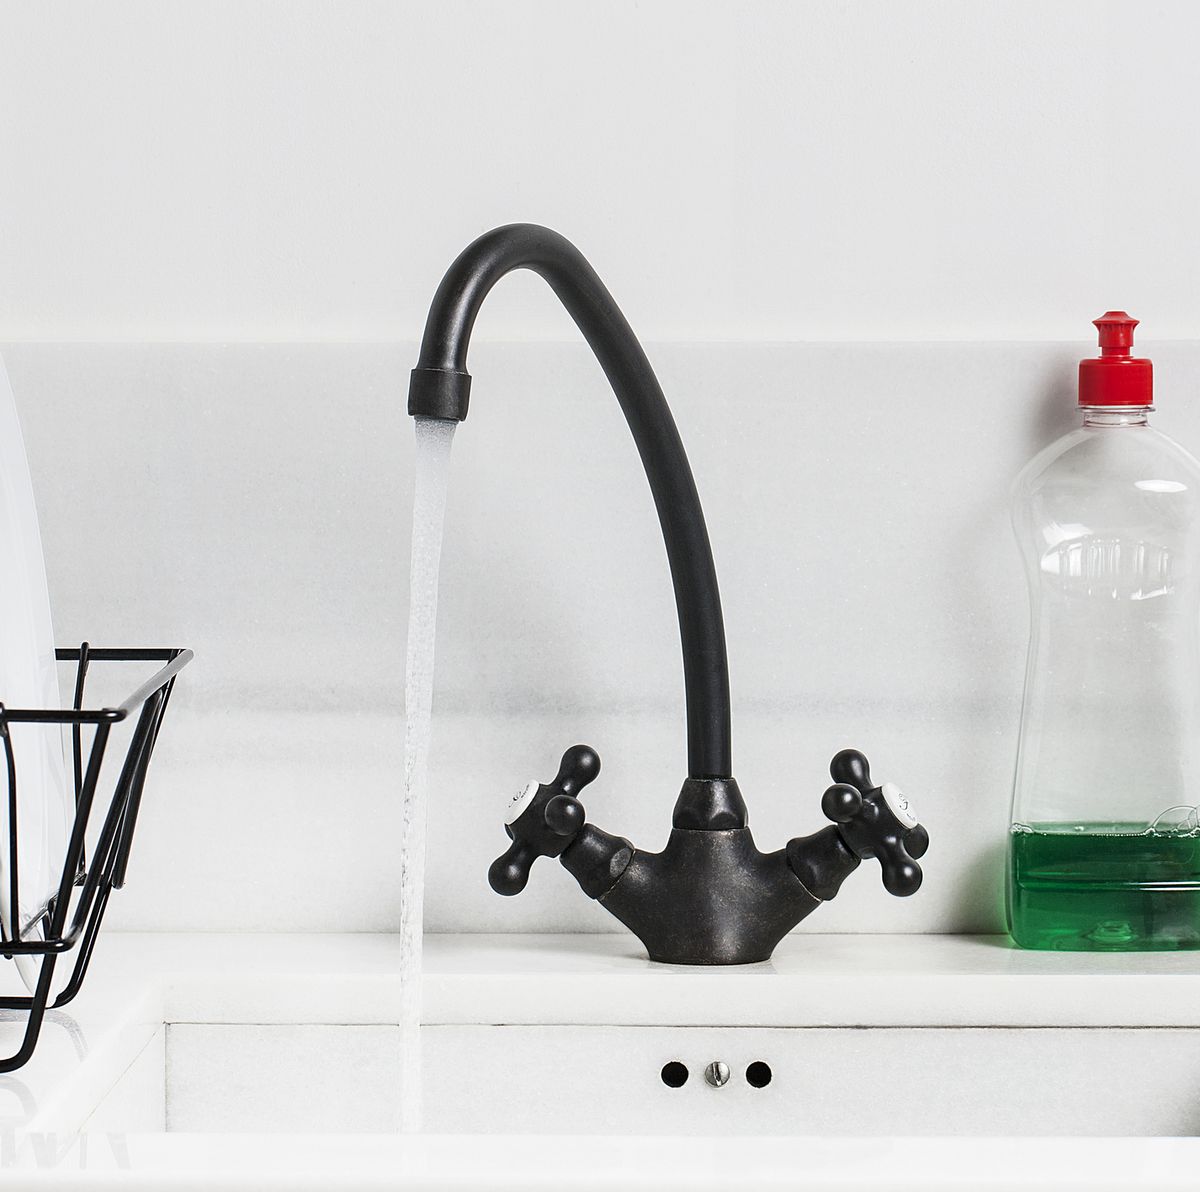 4 Cheap & Easy Ways to Unclog Your Kitchen Sink Without Any Nasty